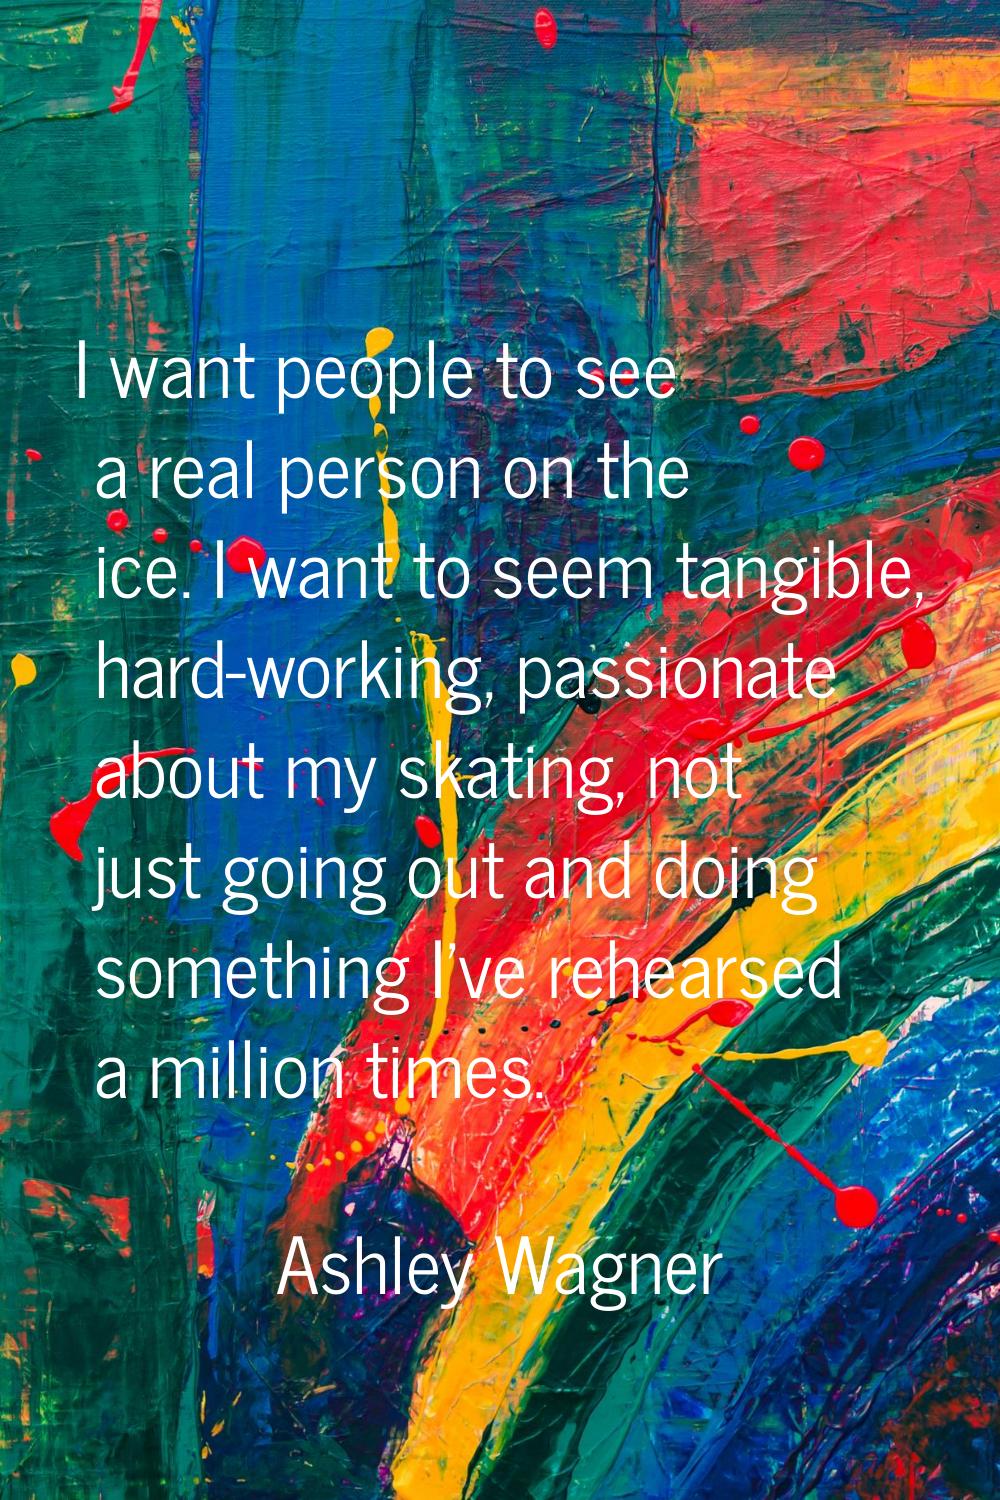 I want people to see a real person on the ice. I want to seem tangible, hard-working, passionate ab